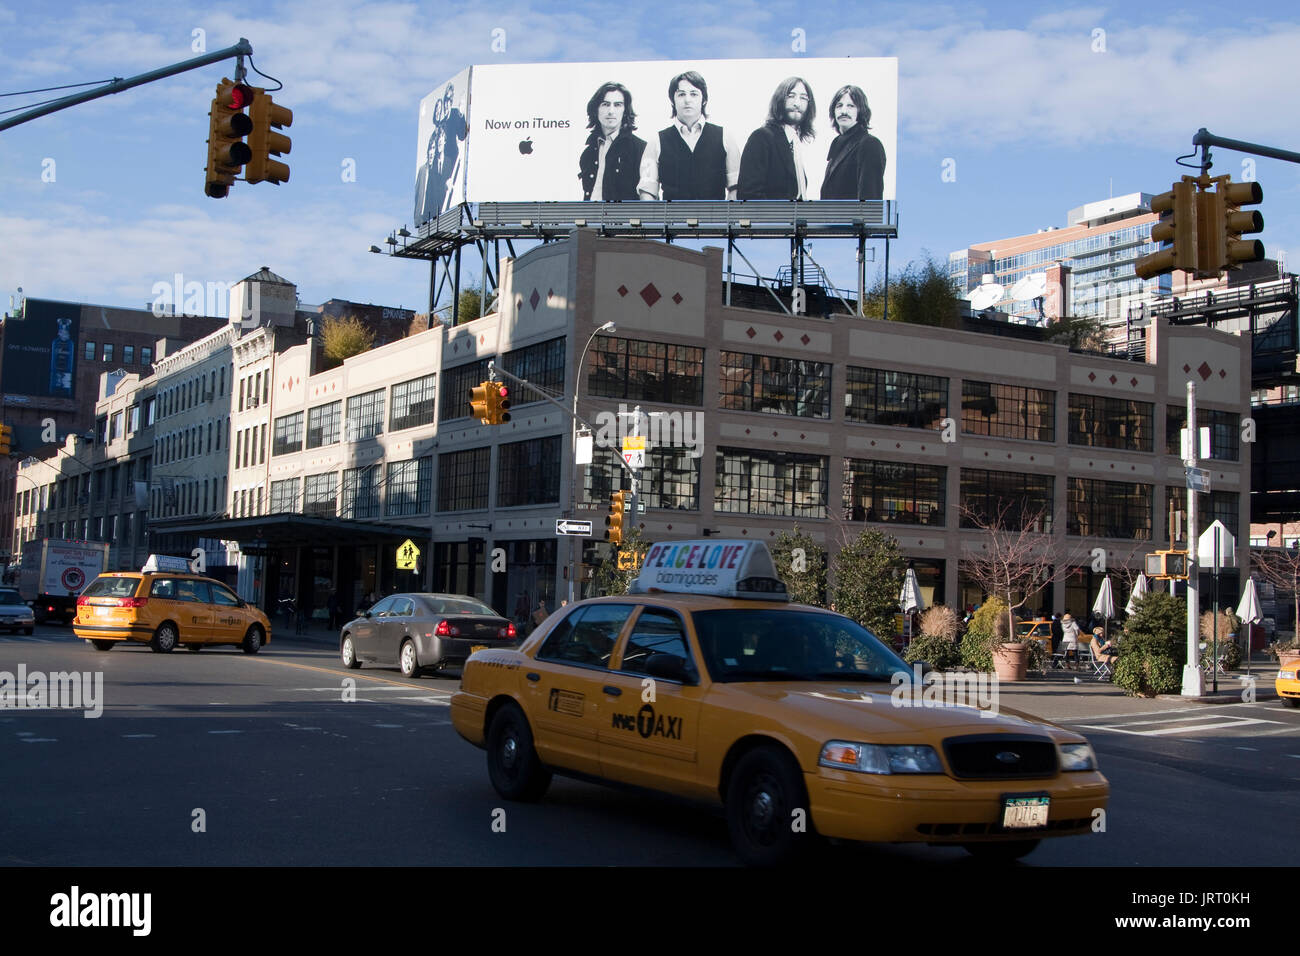 The Beatles advertisement on top of Apple Store in Manhattan, celebrating the band's catalogue being available on iTunes. Stock Photo